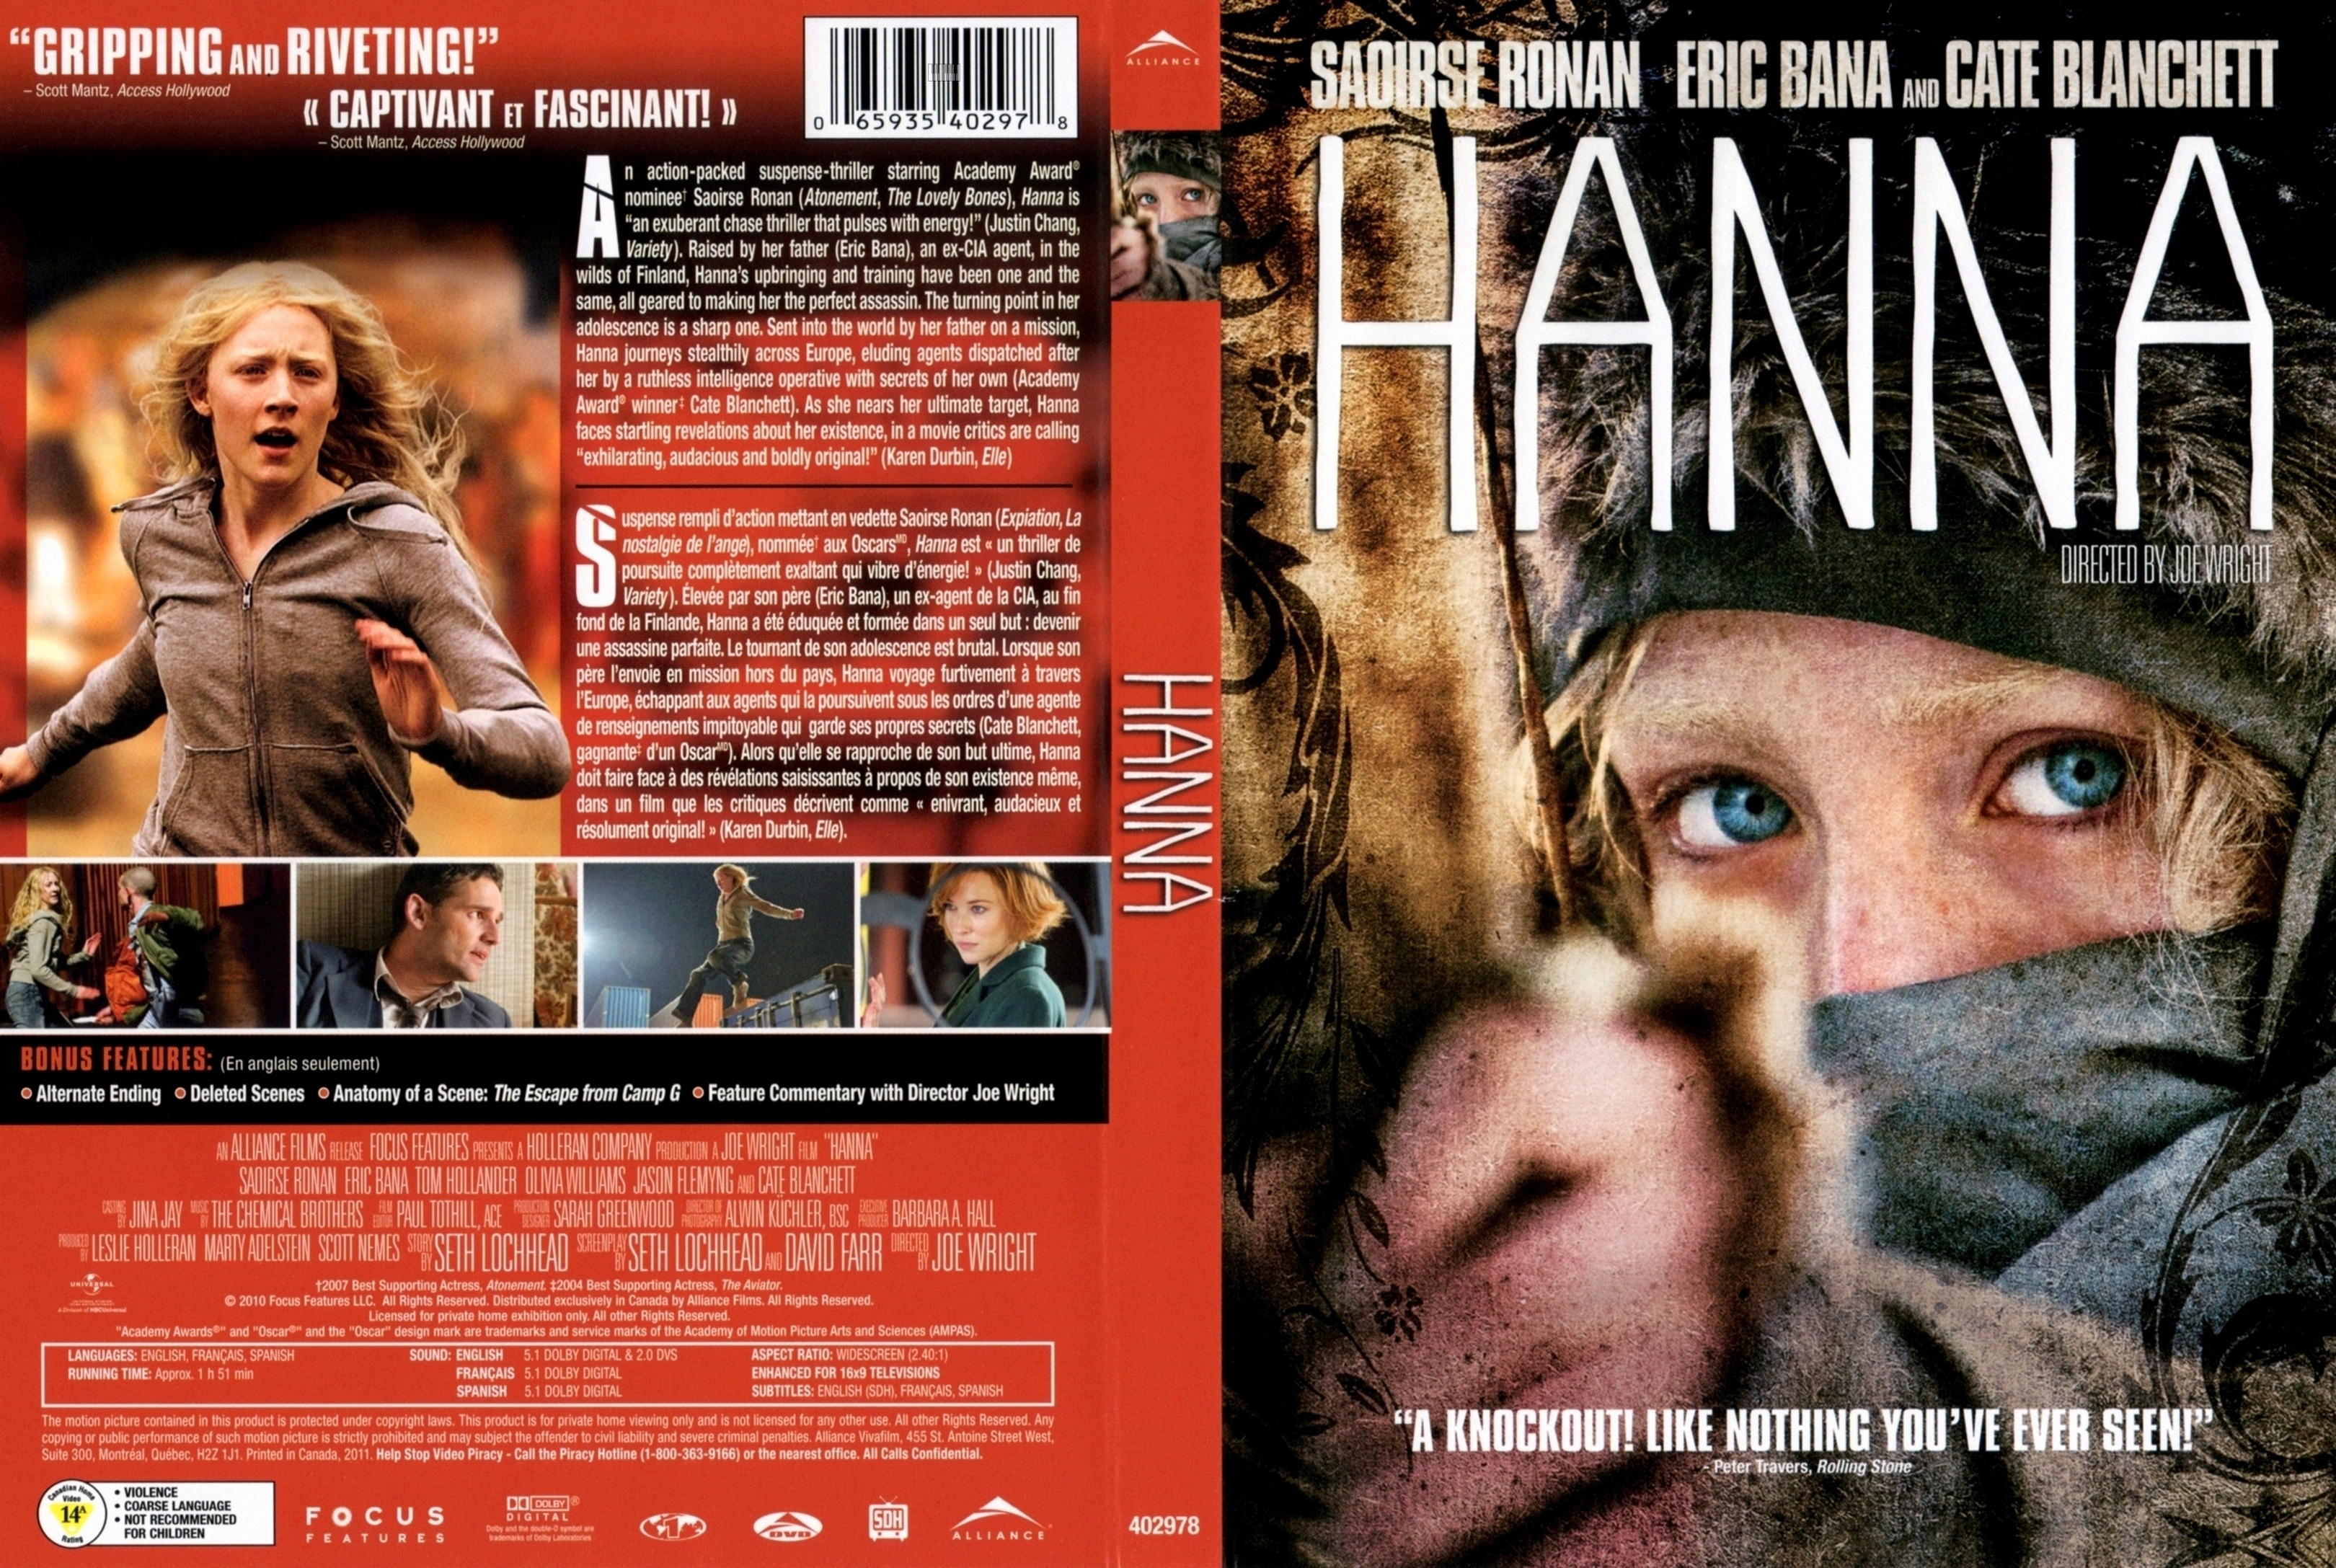 Jaquette DVD Hanna (Canadienne)